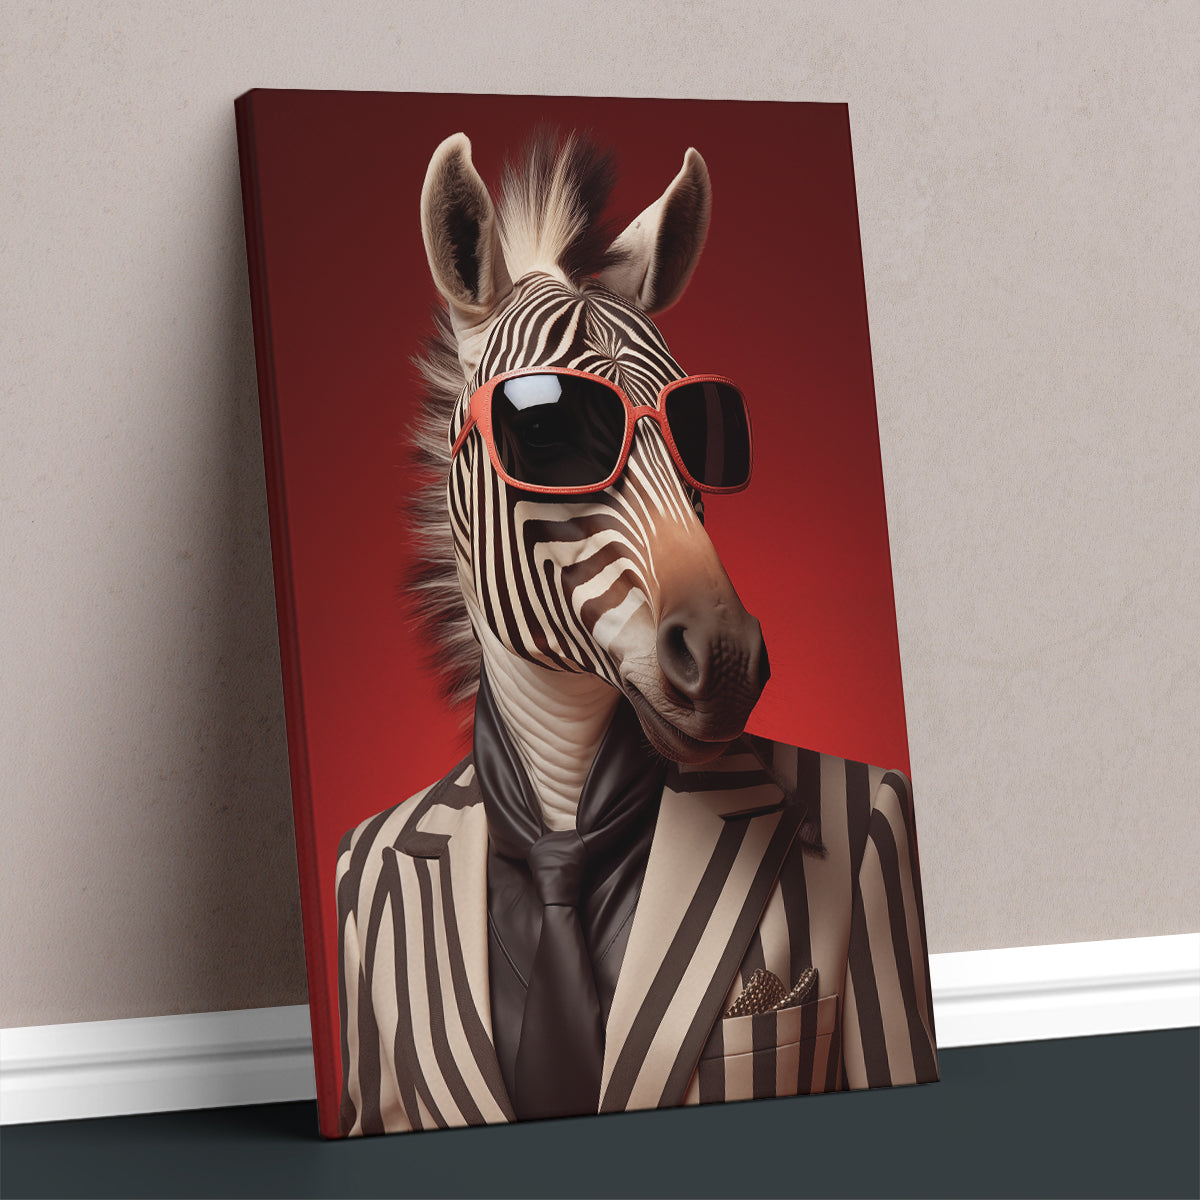 Chic Zebra in Pinstripe Suit, Quirky Animal Art Abstract Art Print Artesty 1 Panel 24"x36" 